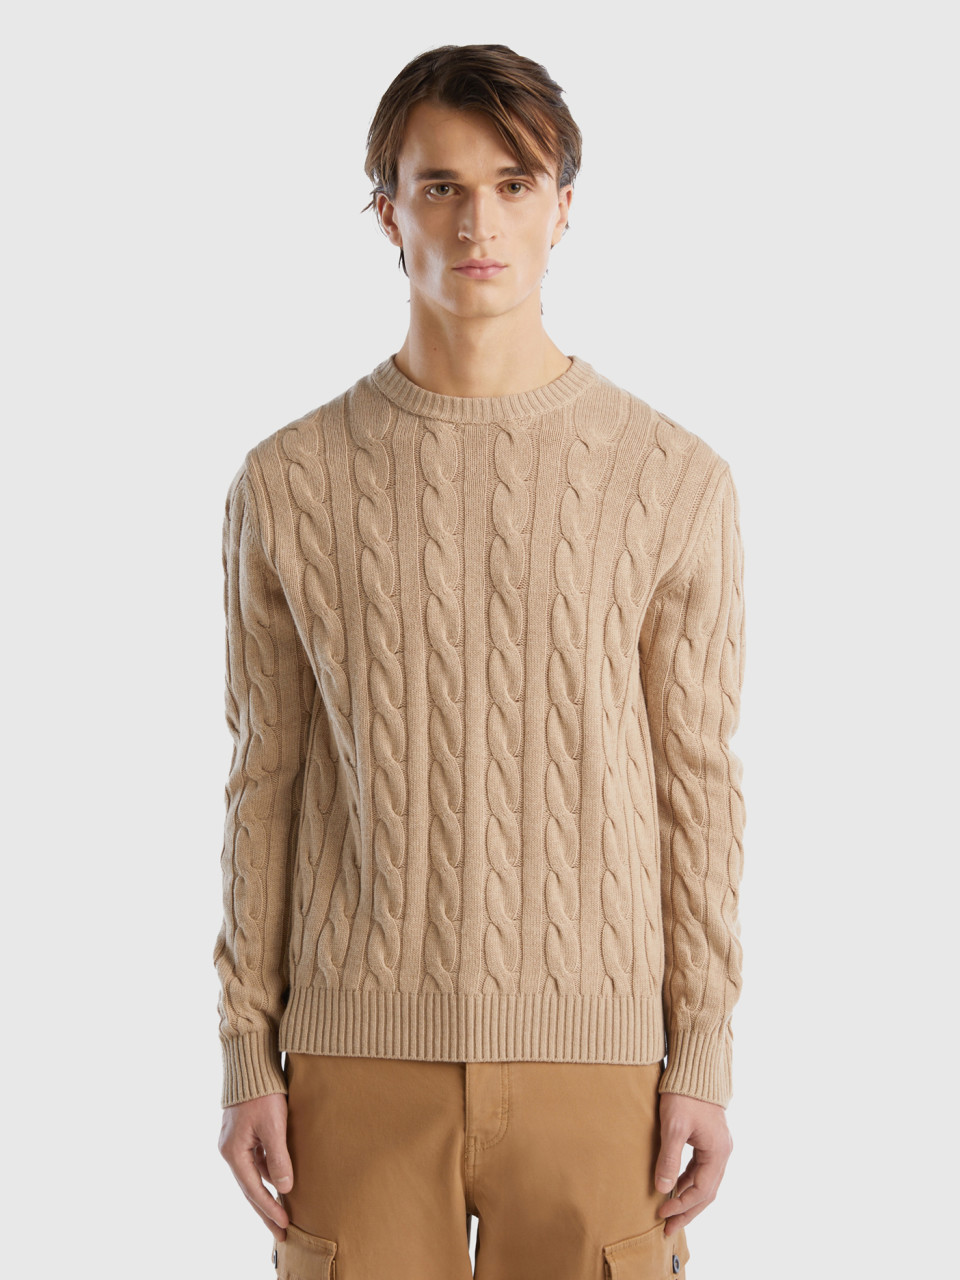 Benetton, Cable Knit Sweater In Cashmere Blend, Beige, Men